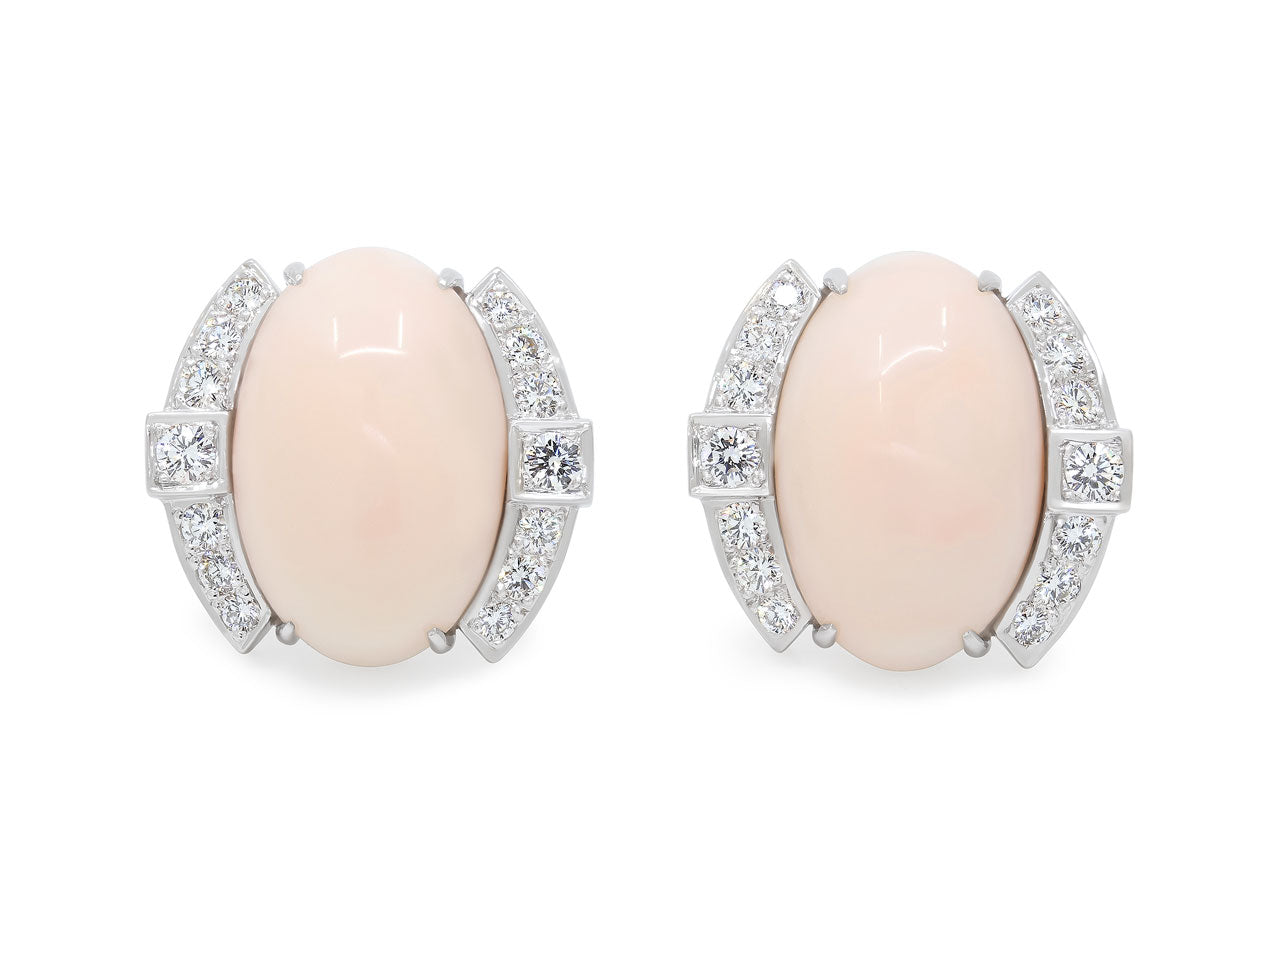 Seaman Schepps Coral and Diamond Earrings in 18K White Gold